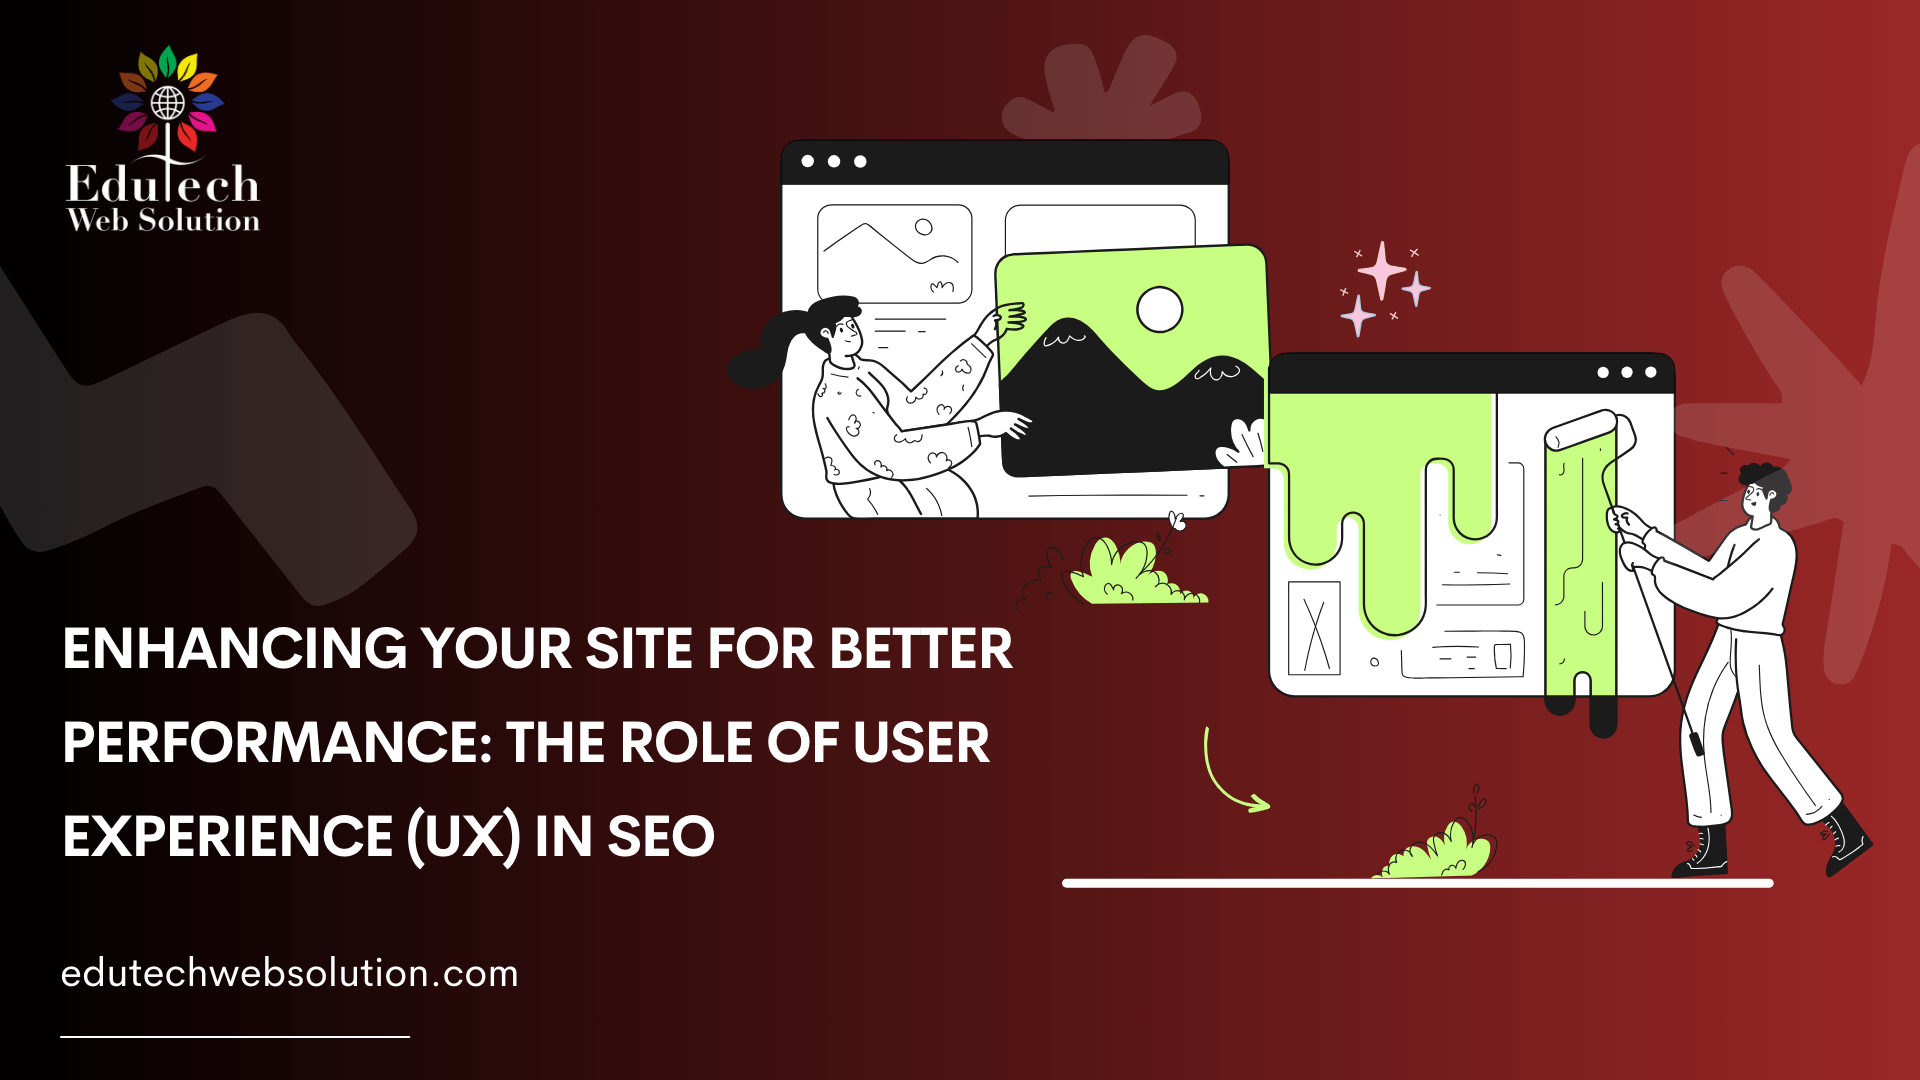 Enhancing Your Site for Better Performance The Role of User Experience (UX) in SEO